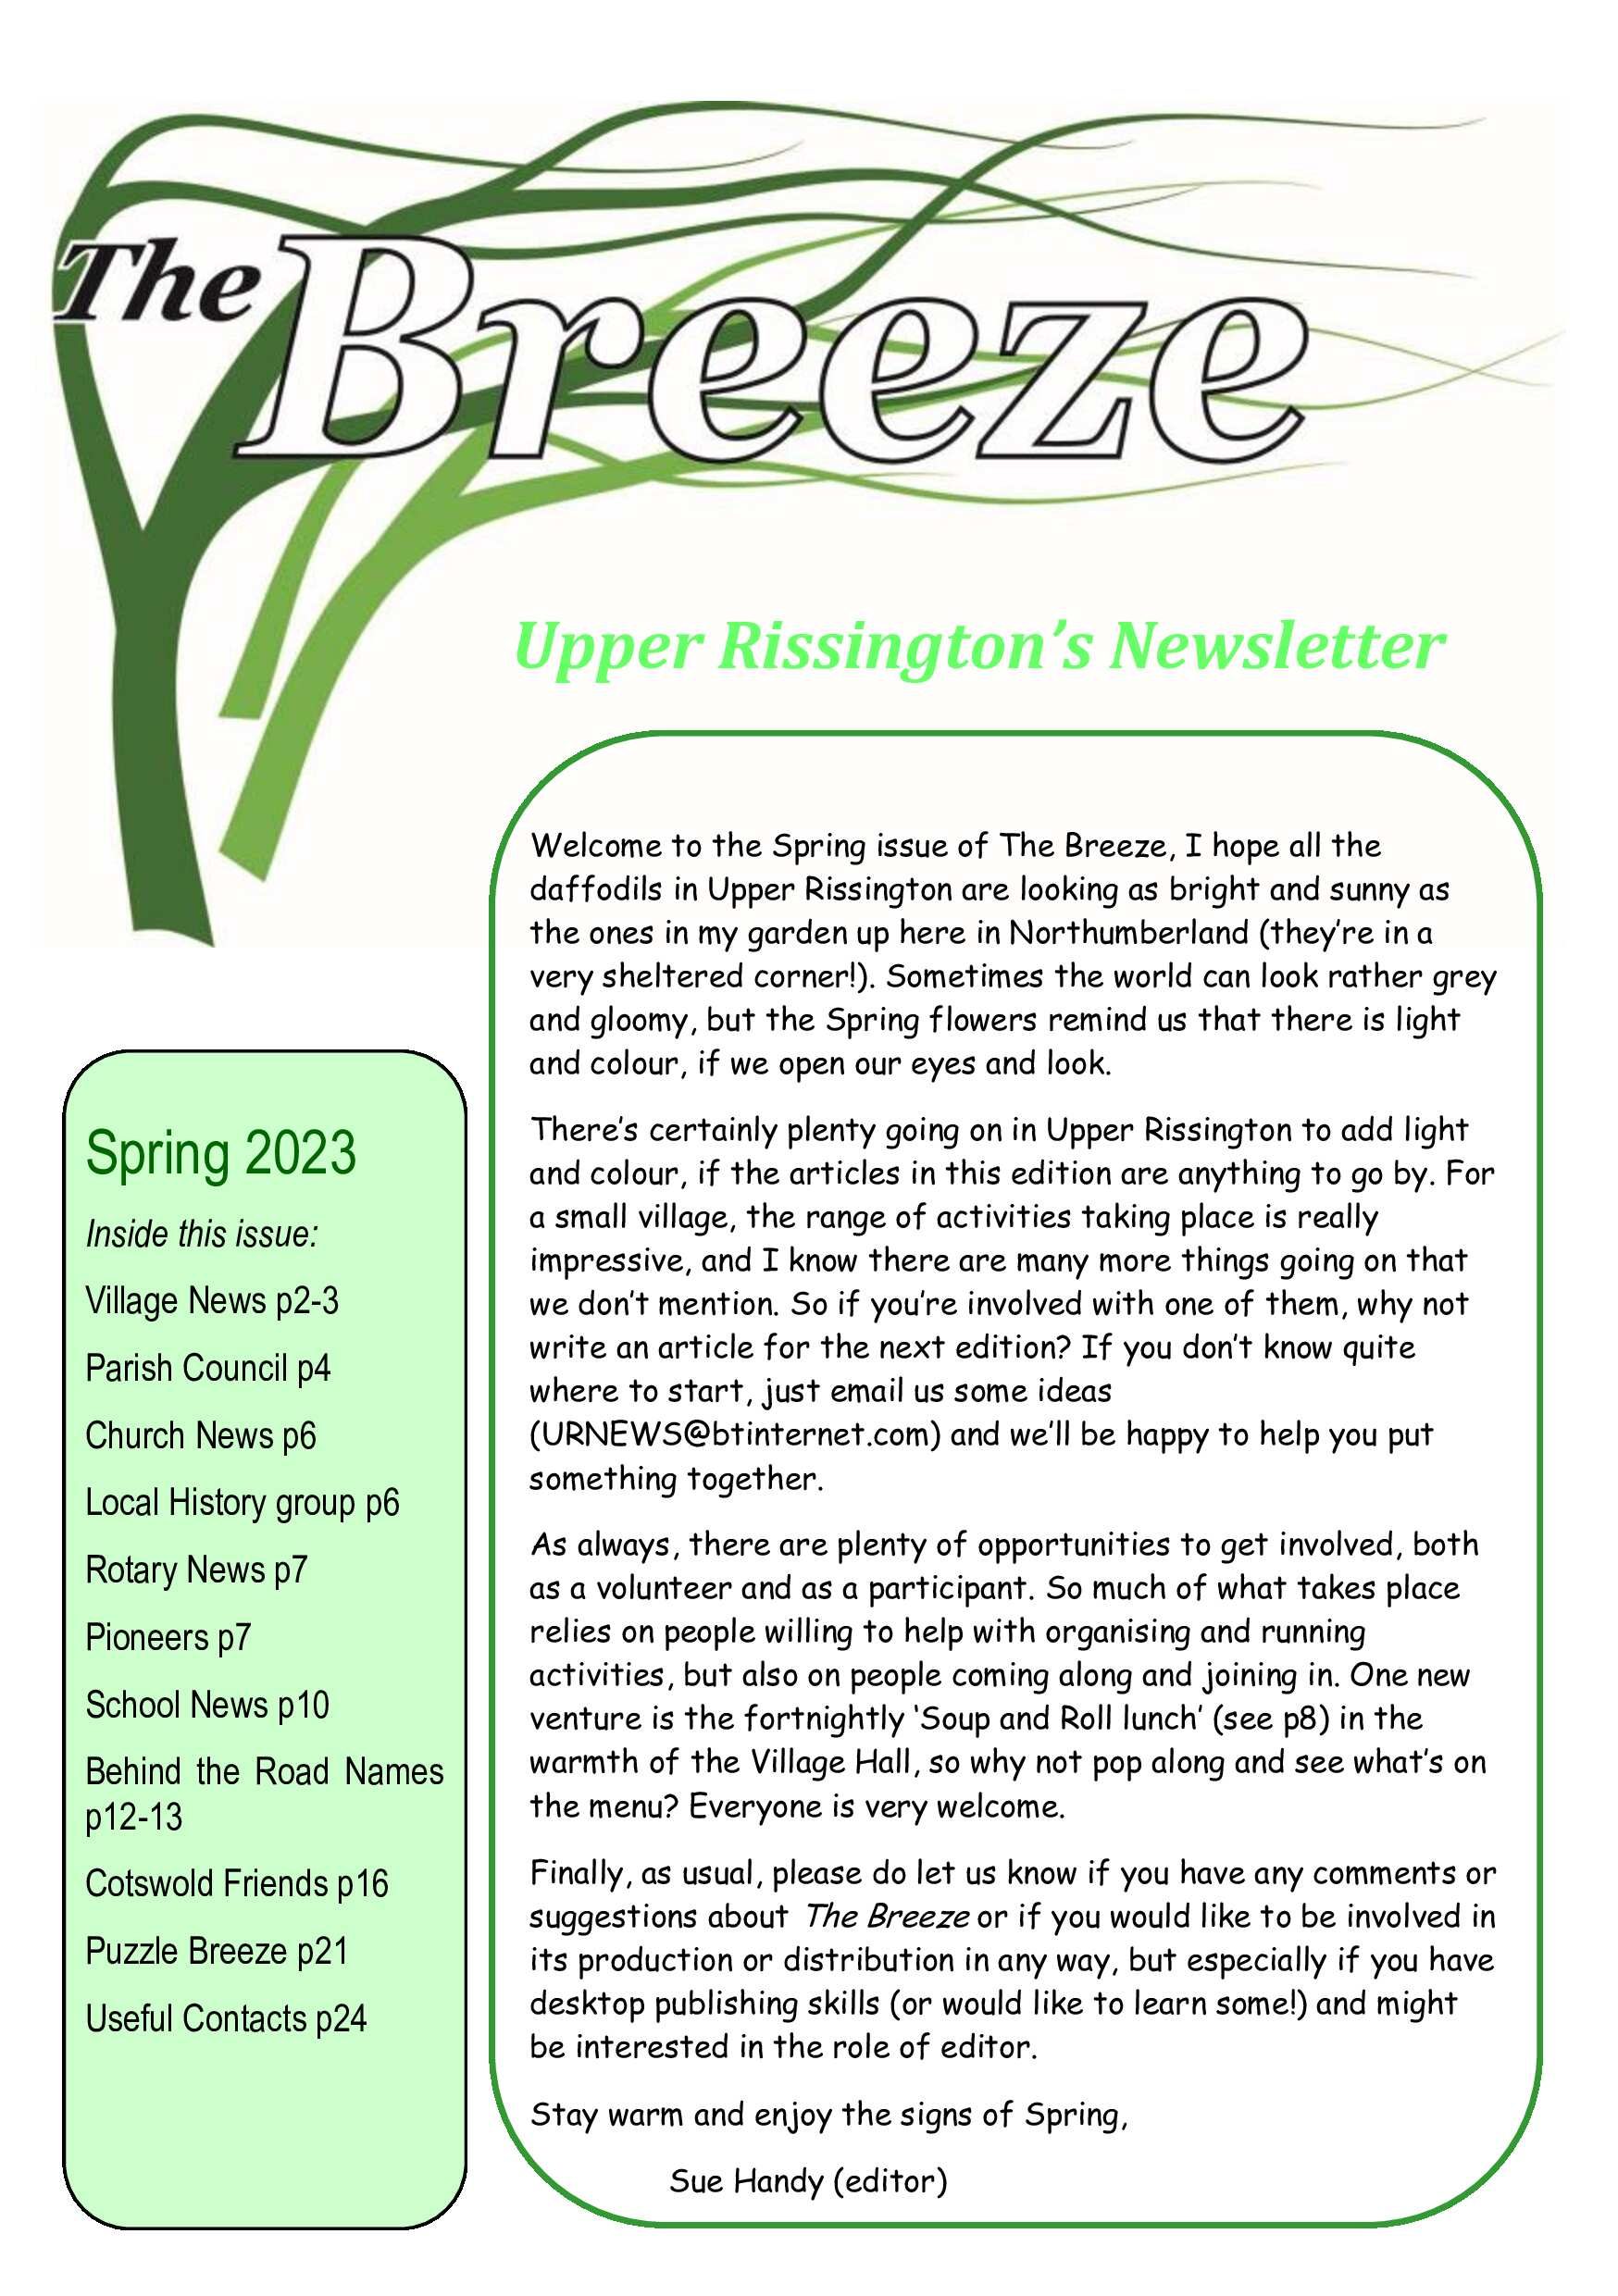 Front cover of the Spring 2023 magazine, The Breeze